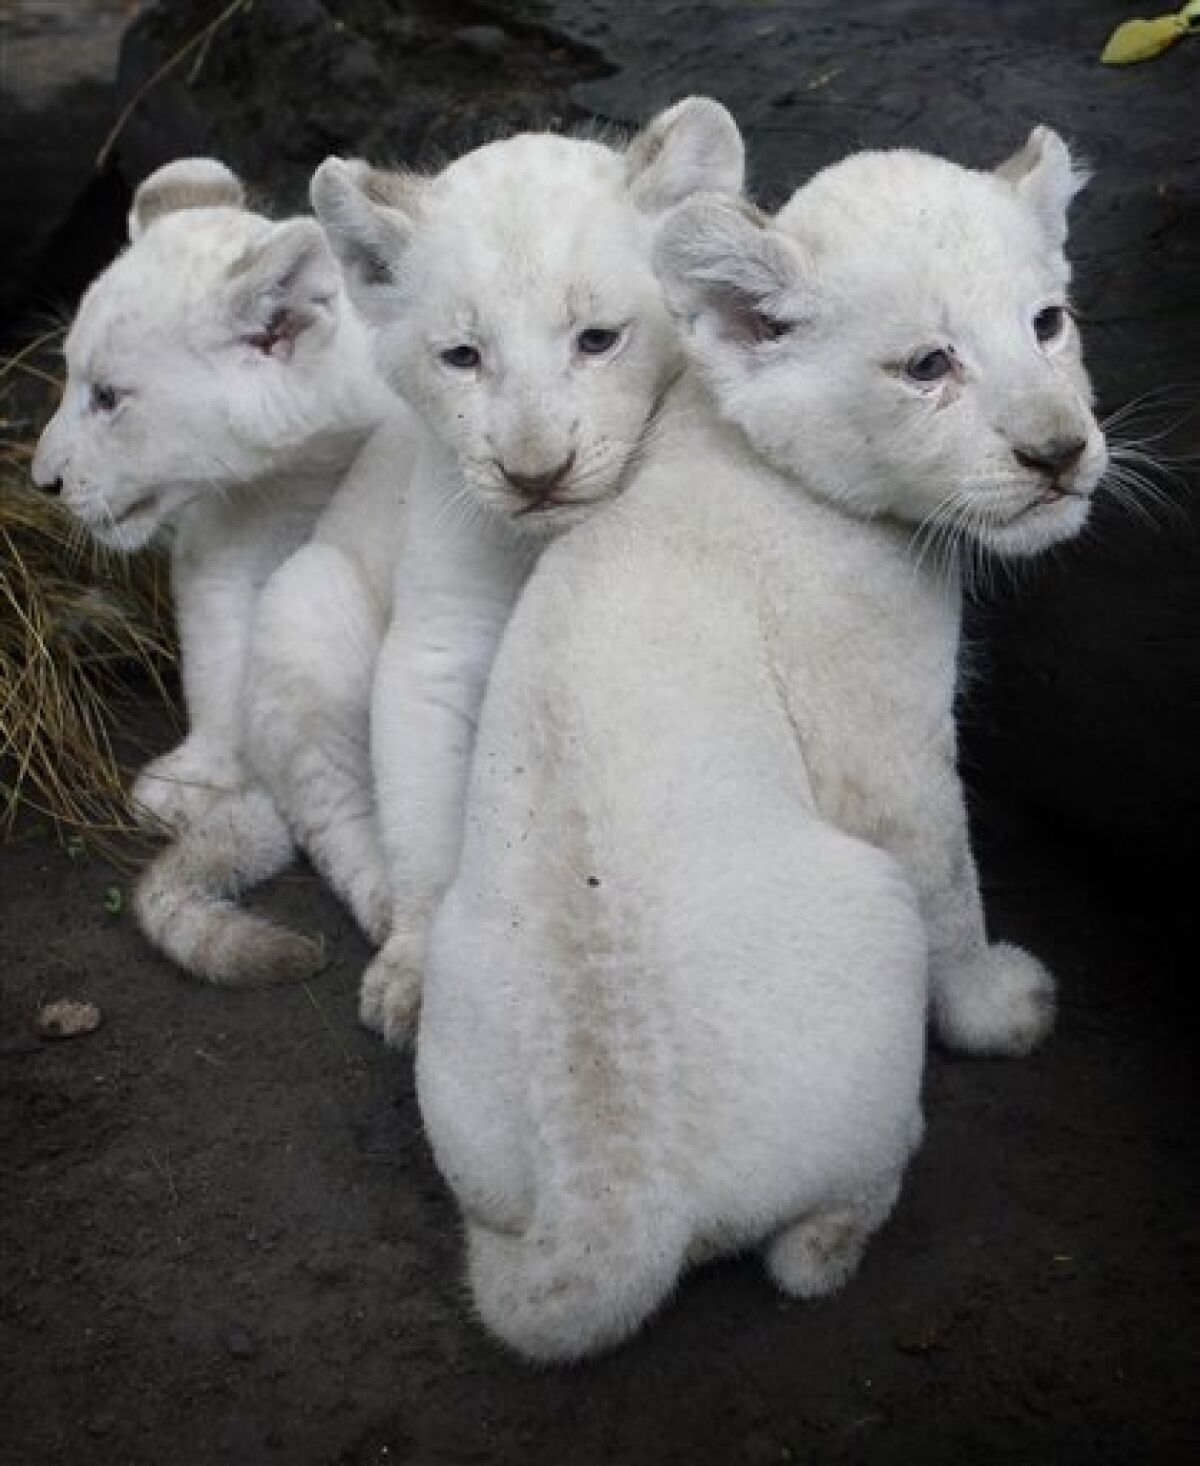 Cute! White lioness bears 3 cubs in Argentina - The San Diego Union-Tribune